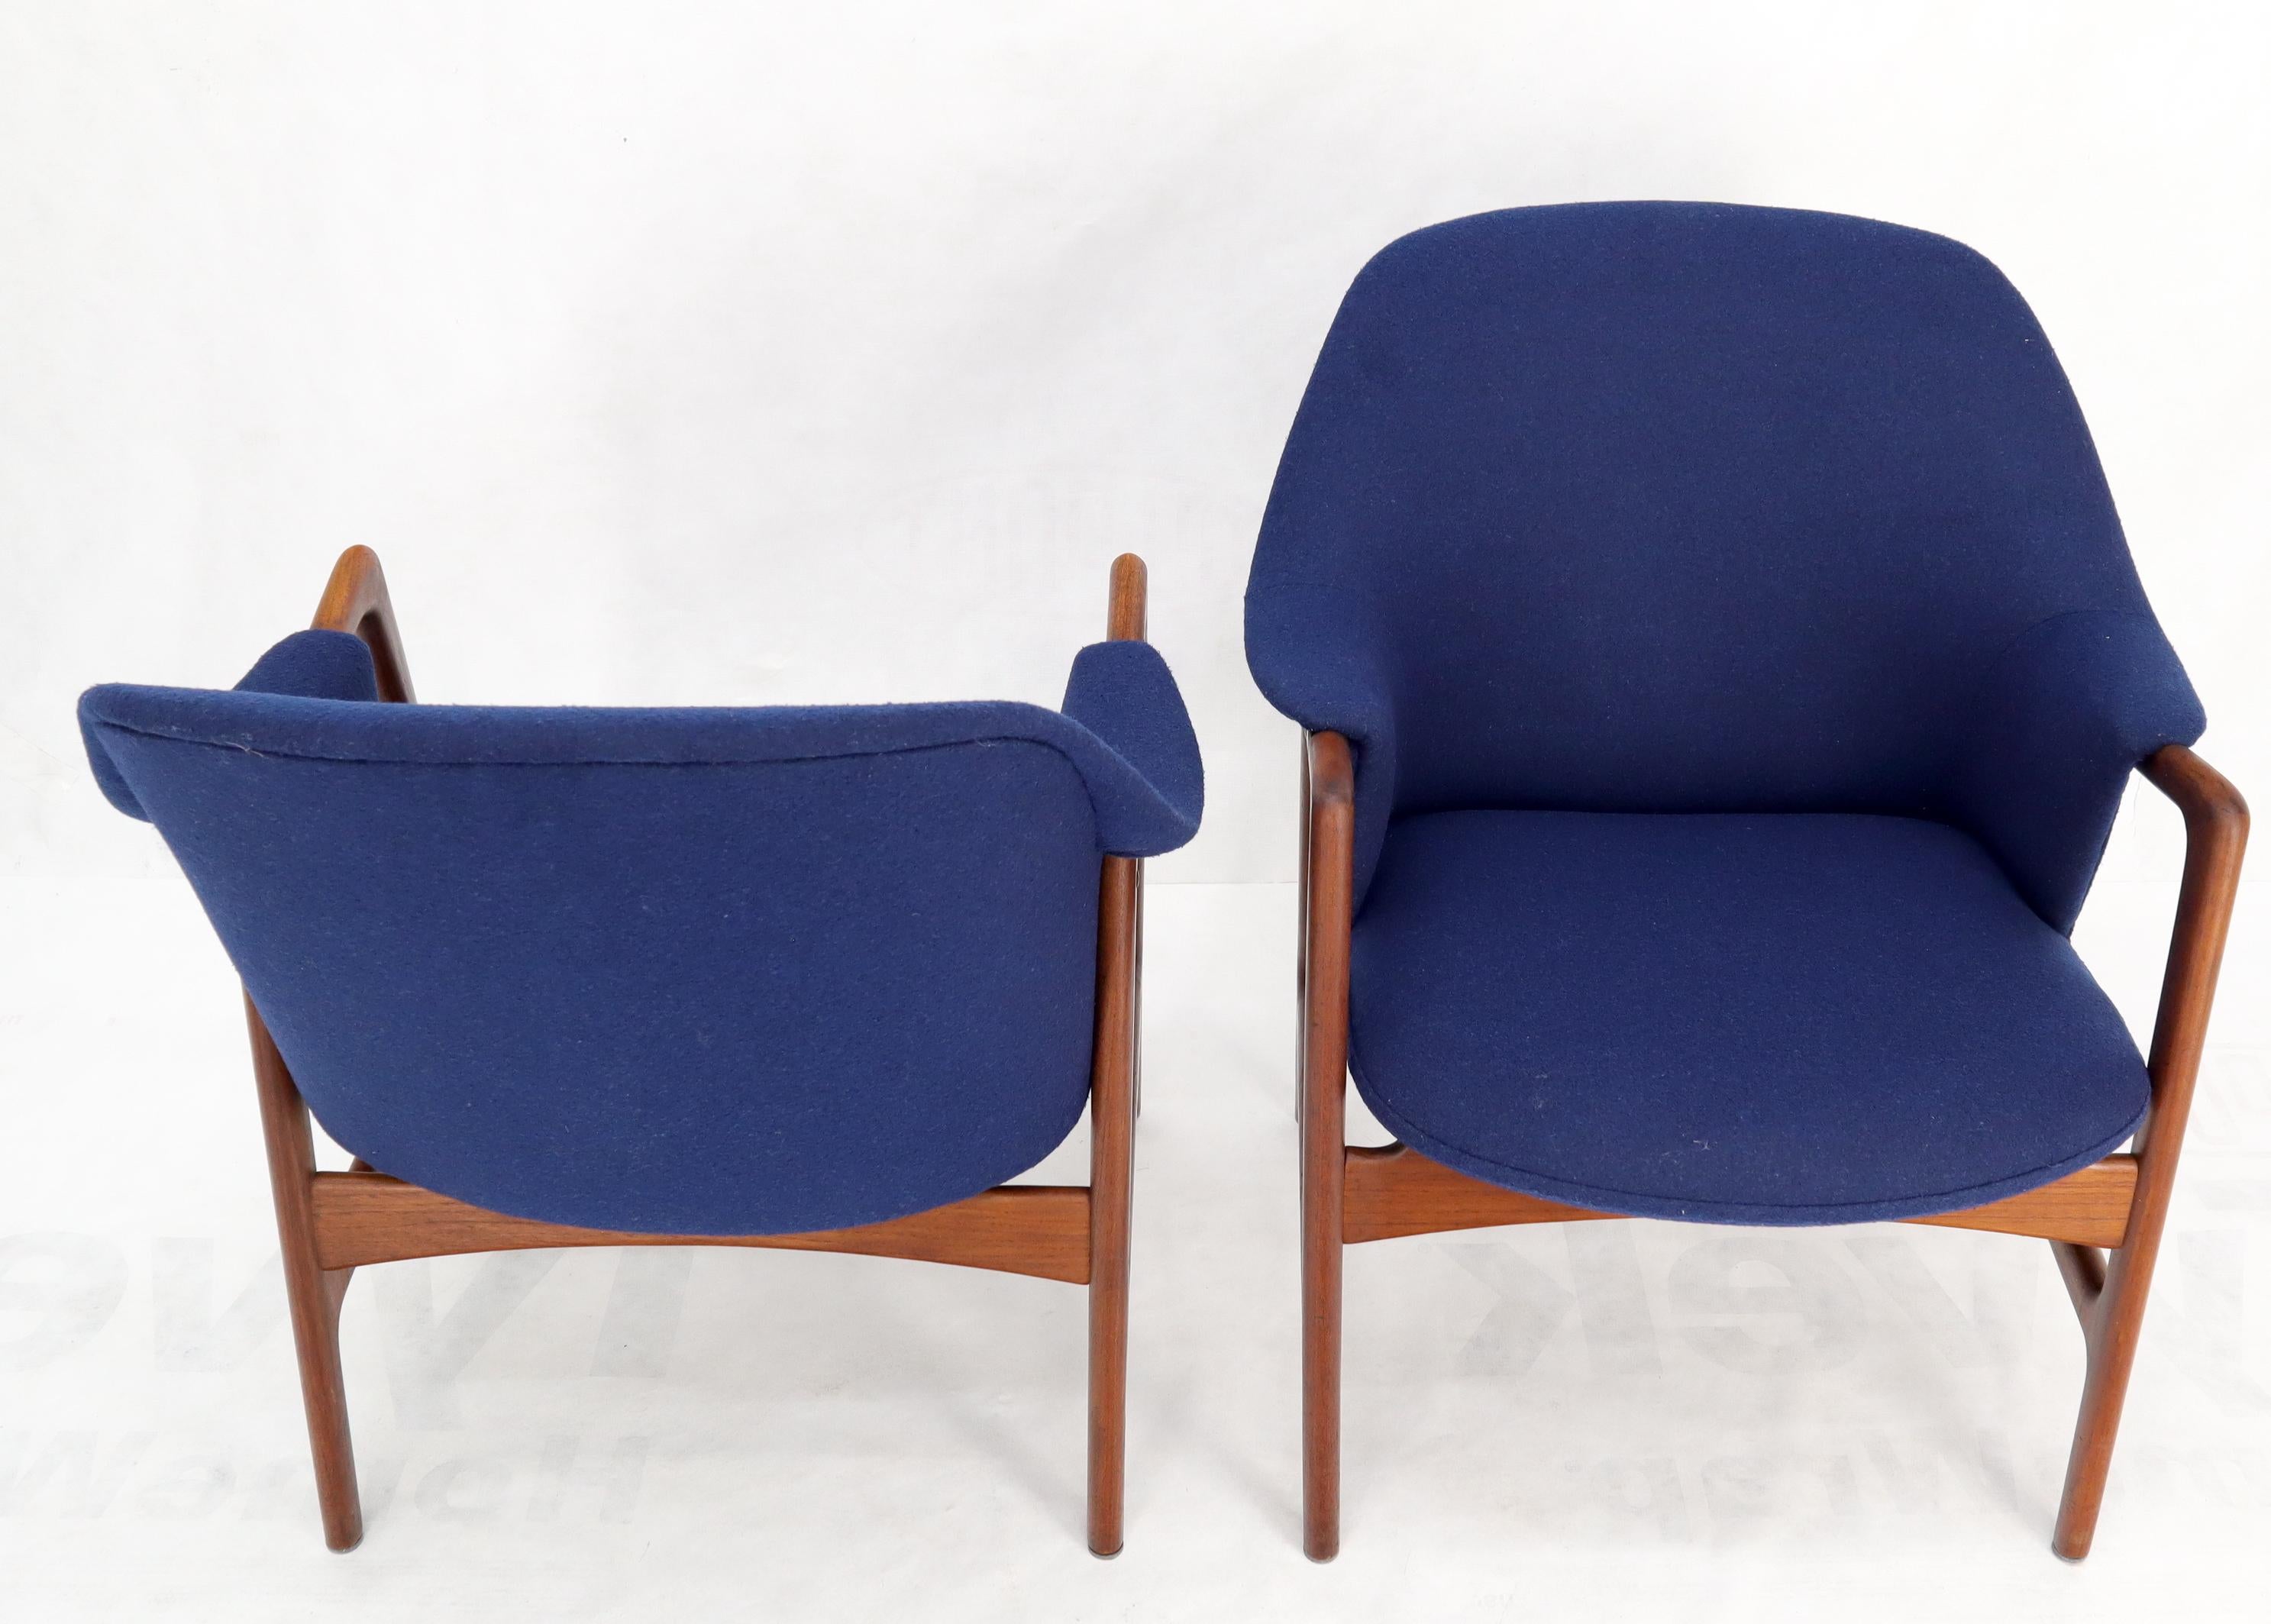 New Blue Wool Upholstery Teak Frames Danish Mid-Century Modern Lounge Chairs For Sale 7